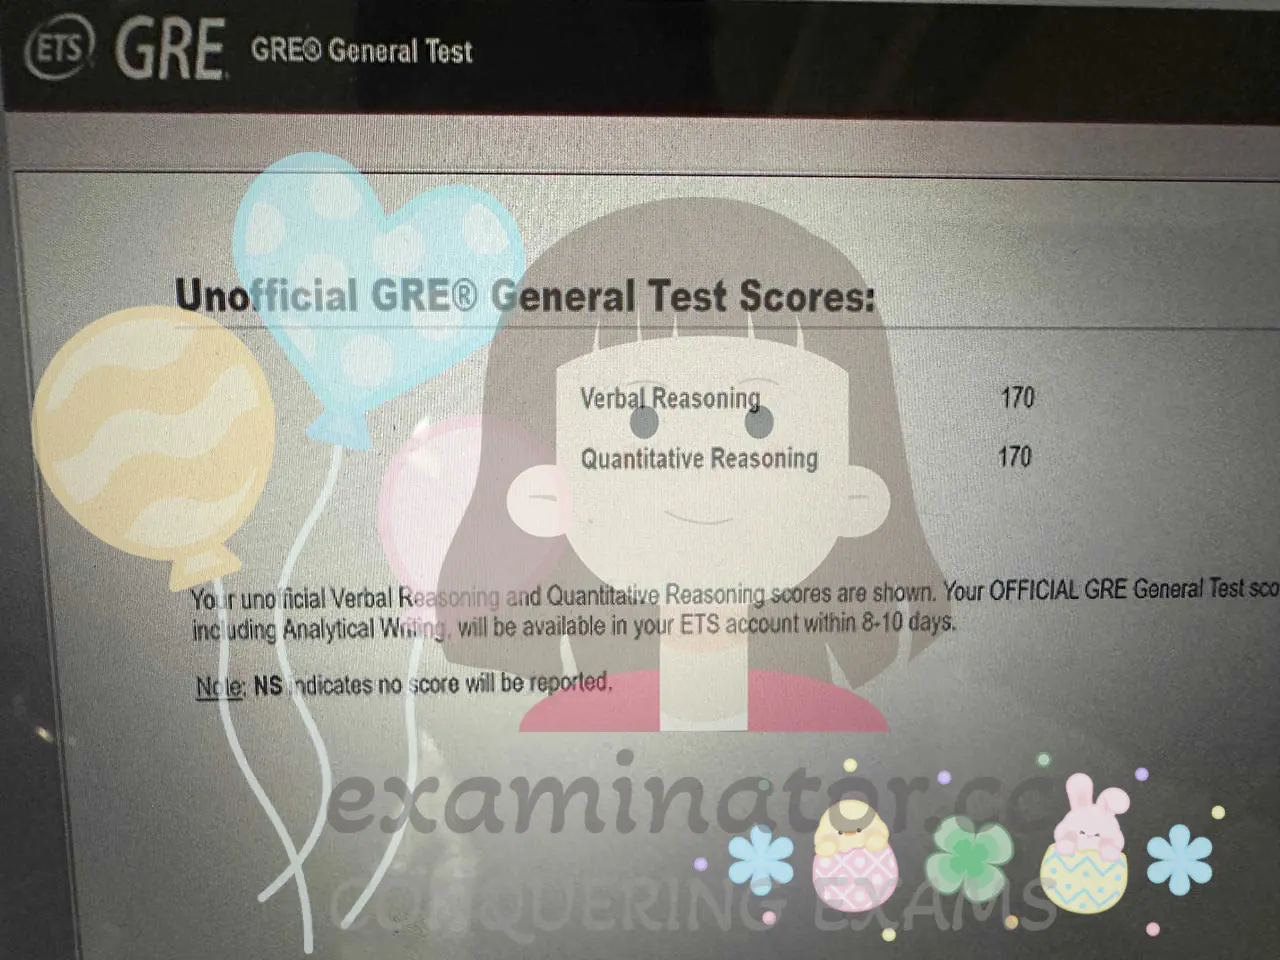 🇺🇸"Can't stress enough importance of trusting the process." Perfect 340 GRE Score Attained Despite Computer Shutdown Mid-Test, Client Left Review of GRE Cheating Service💪🏻